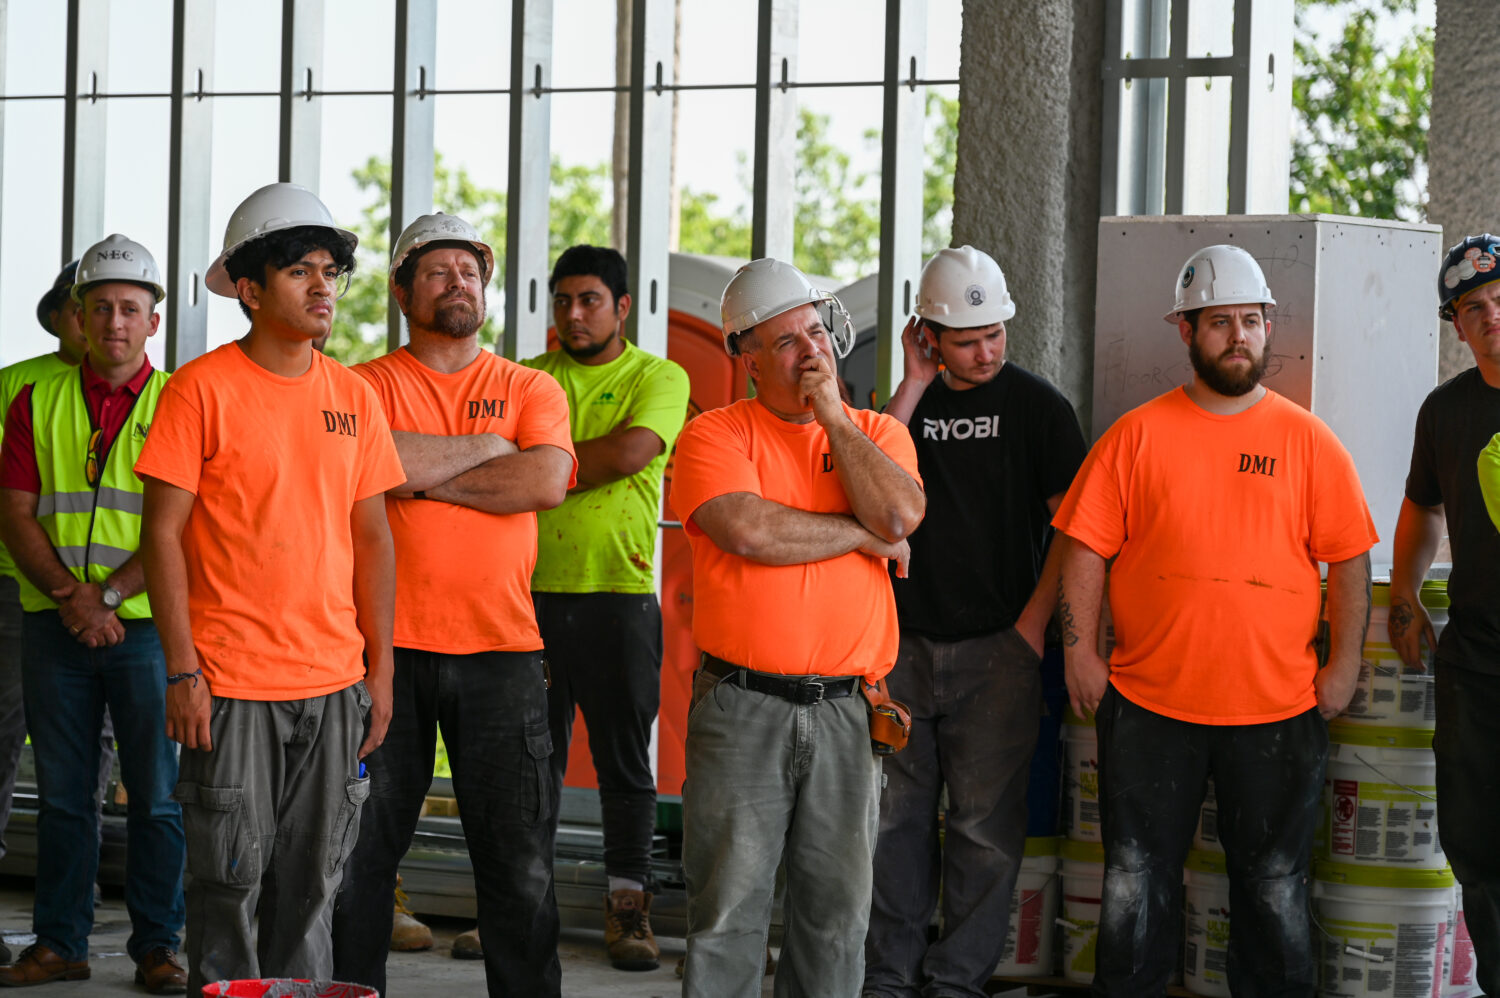 construction workers in orange shirts listening to John Tocci's speech 